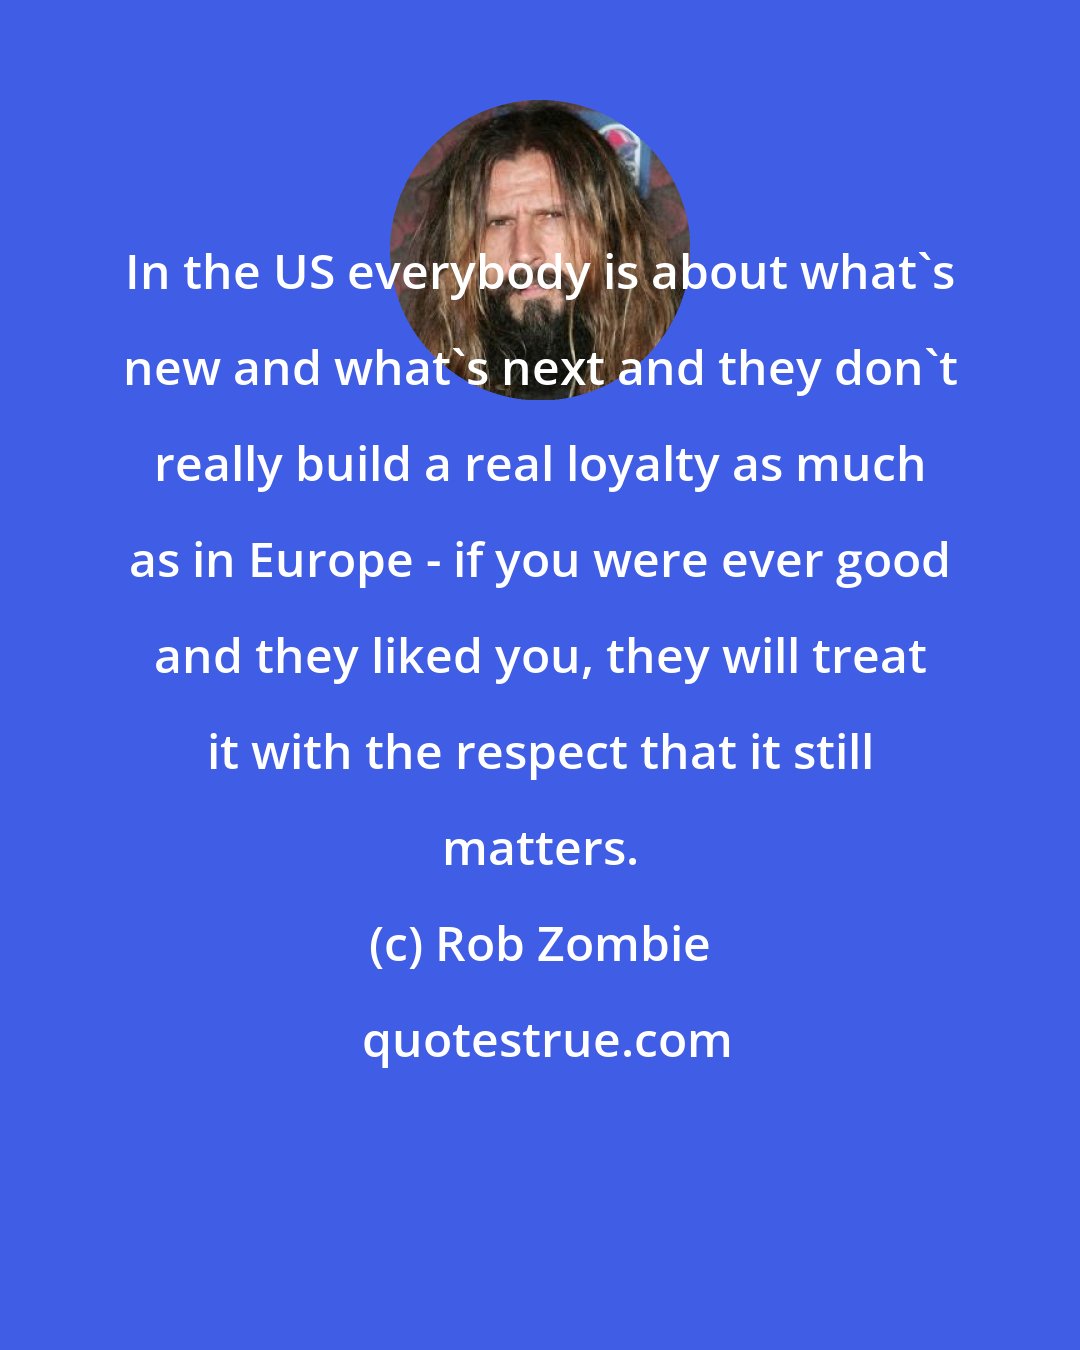 Rob Zombie: In the US everybody is about what's new and what's next and they don't really build a real loyalty as much as in Europe - if you were ever good and they liked you, they will treat it with the respect that it still matters.